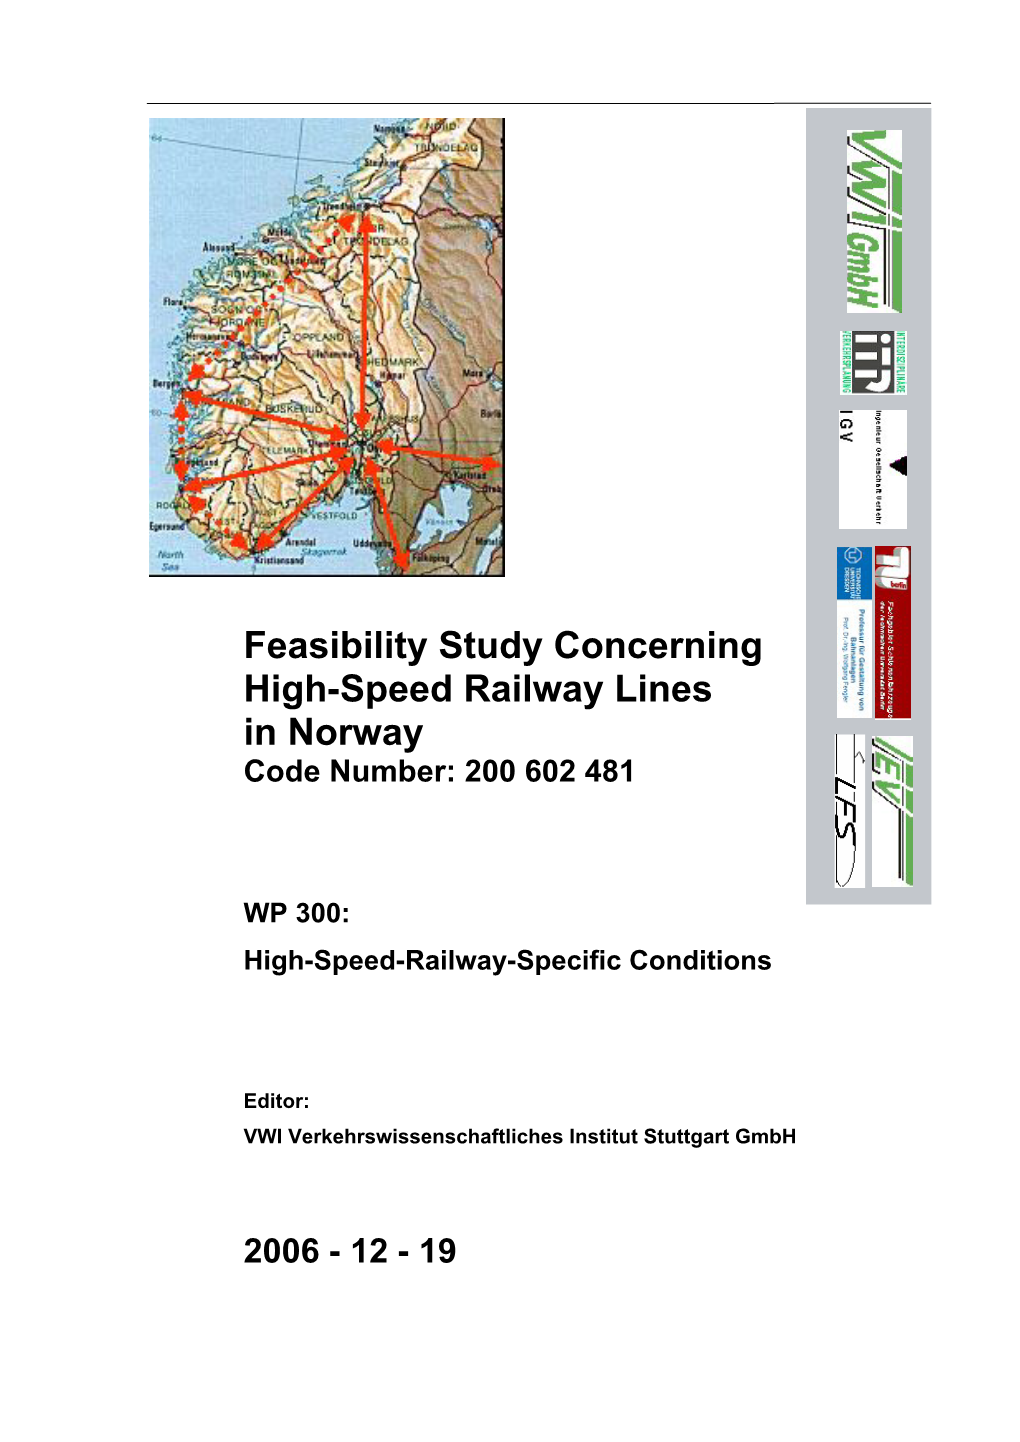 High-Speed-Railway-Specific Conditions